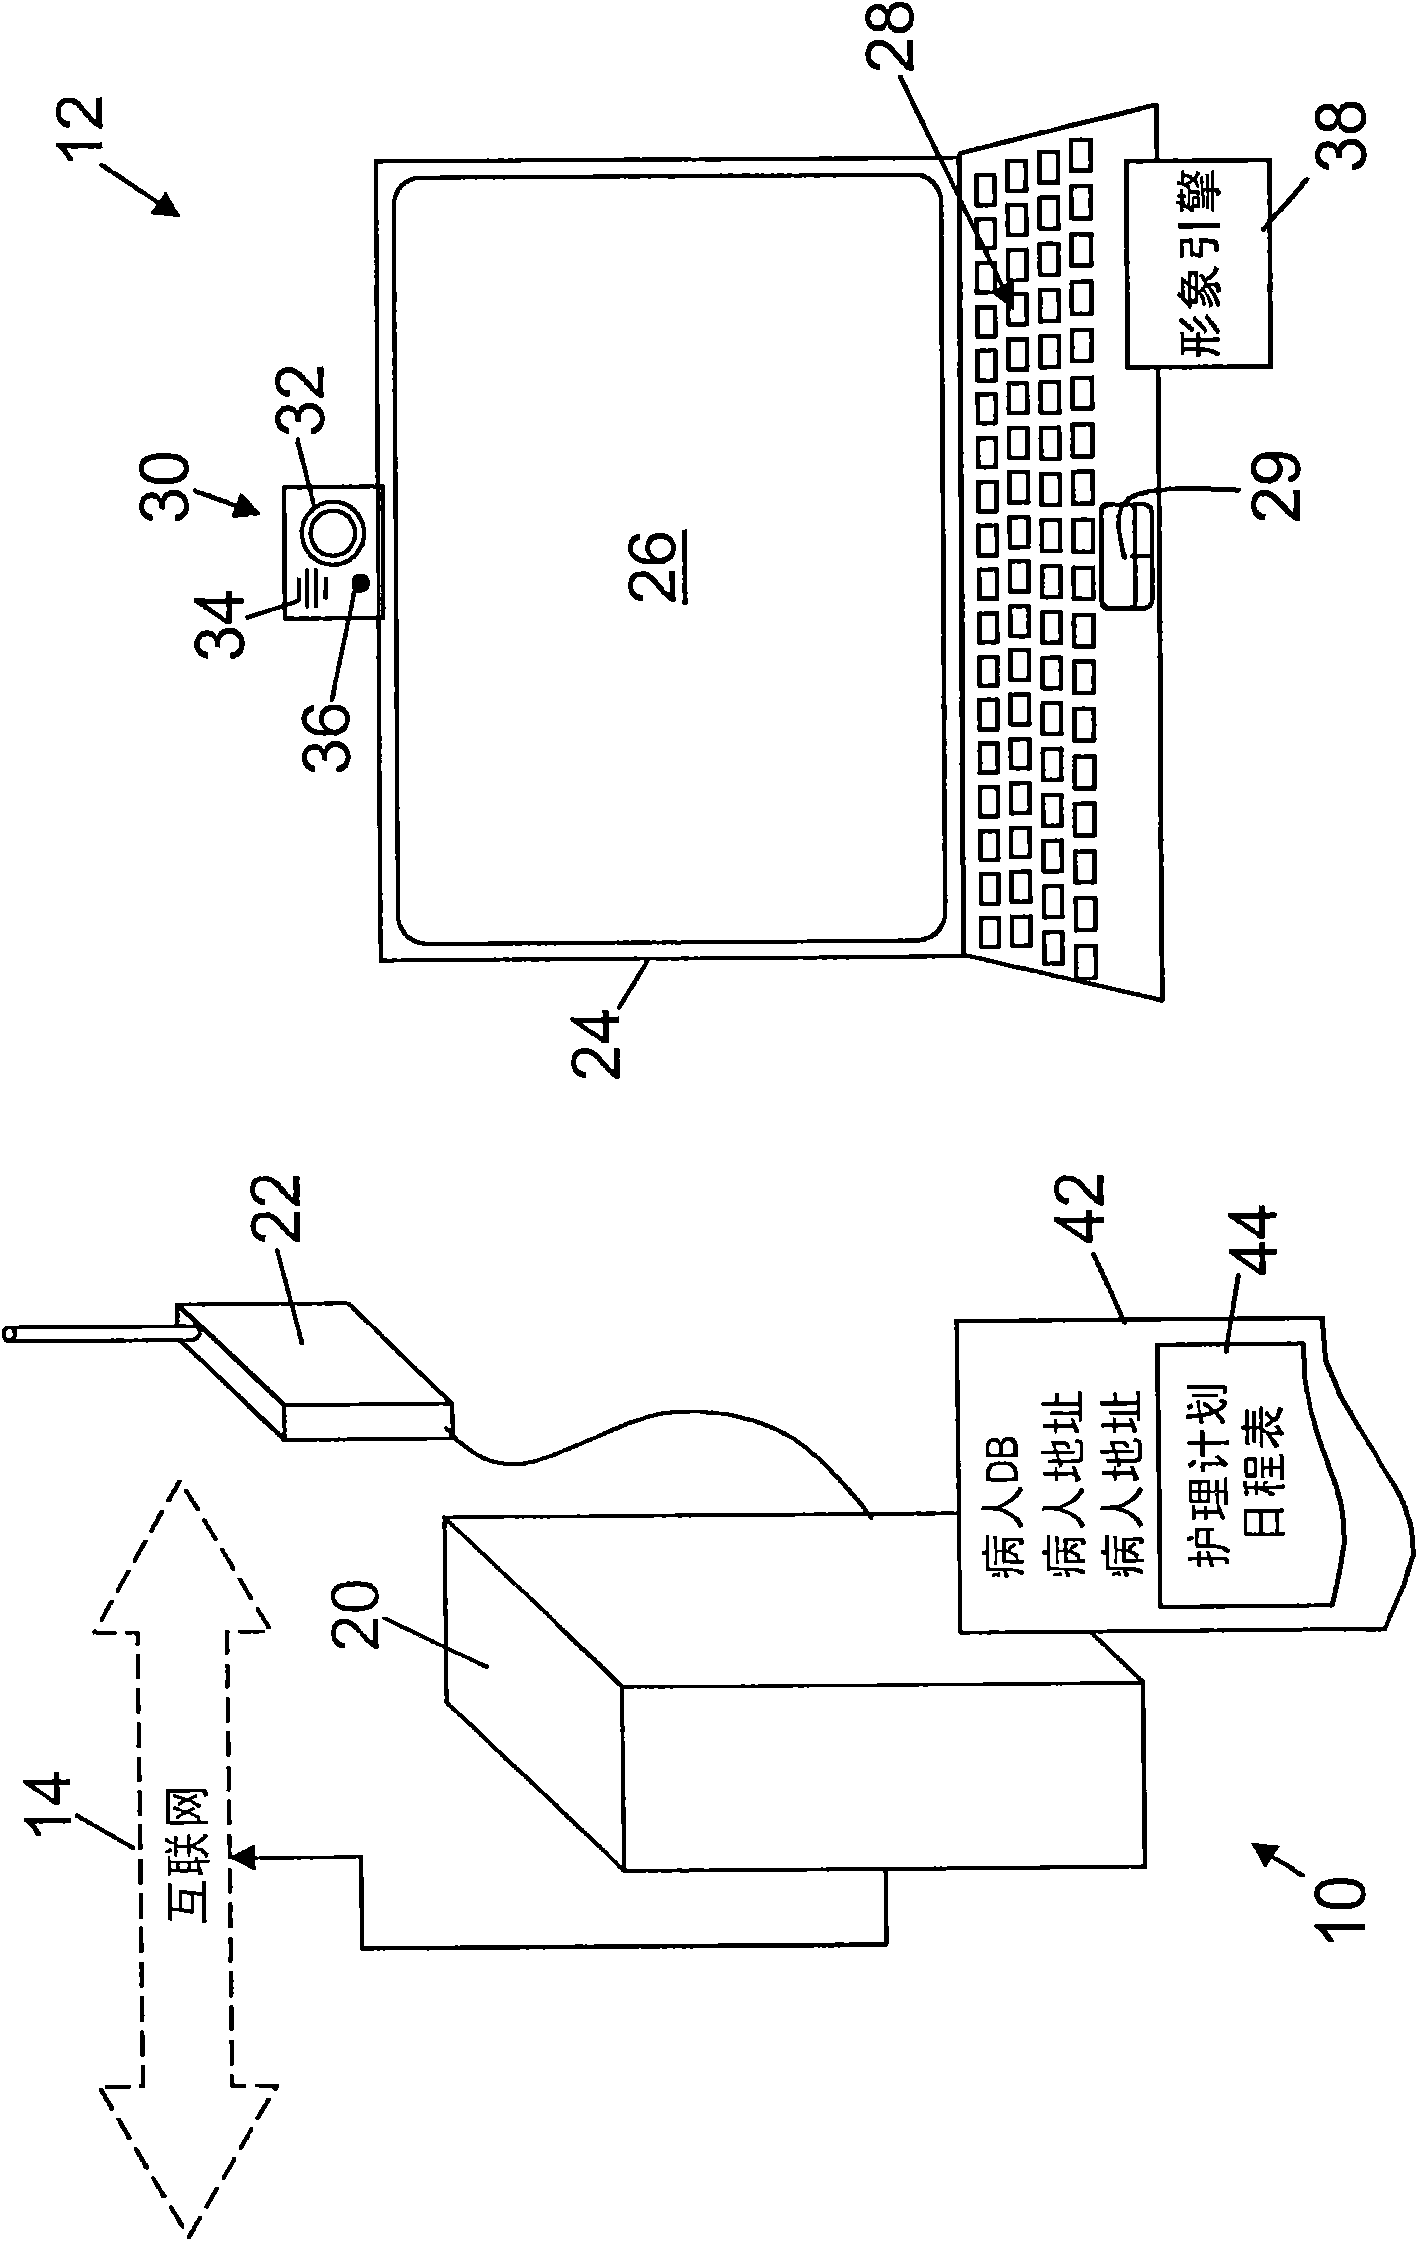 Medical video communication systems and methods